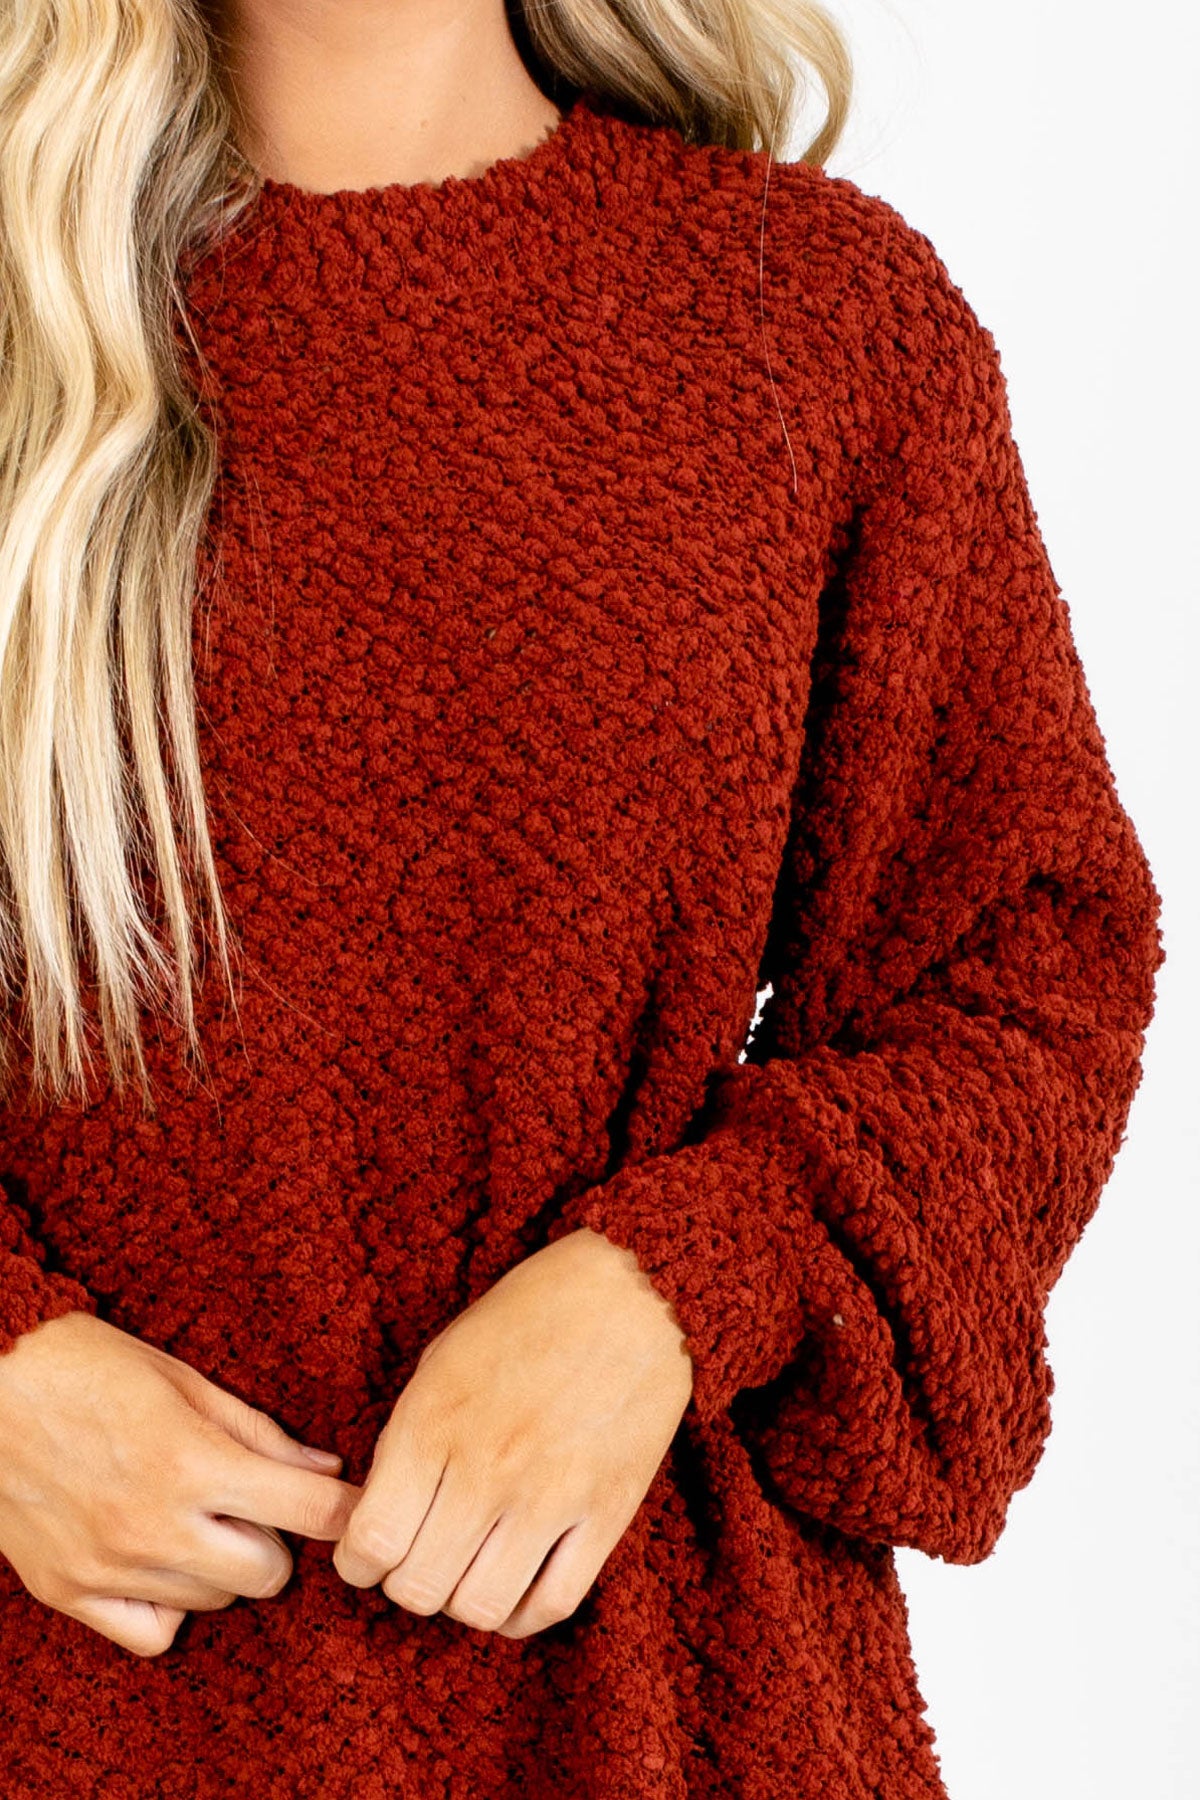 Oversized Popcorn Knit Sweater in Rust Red